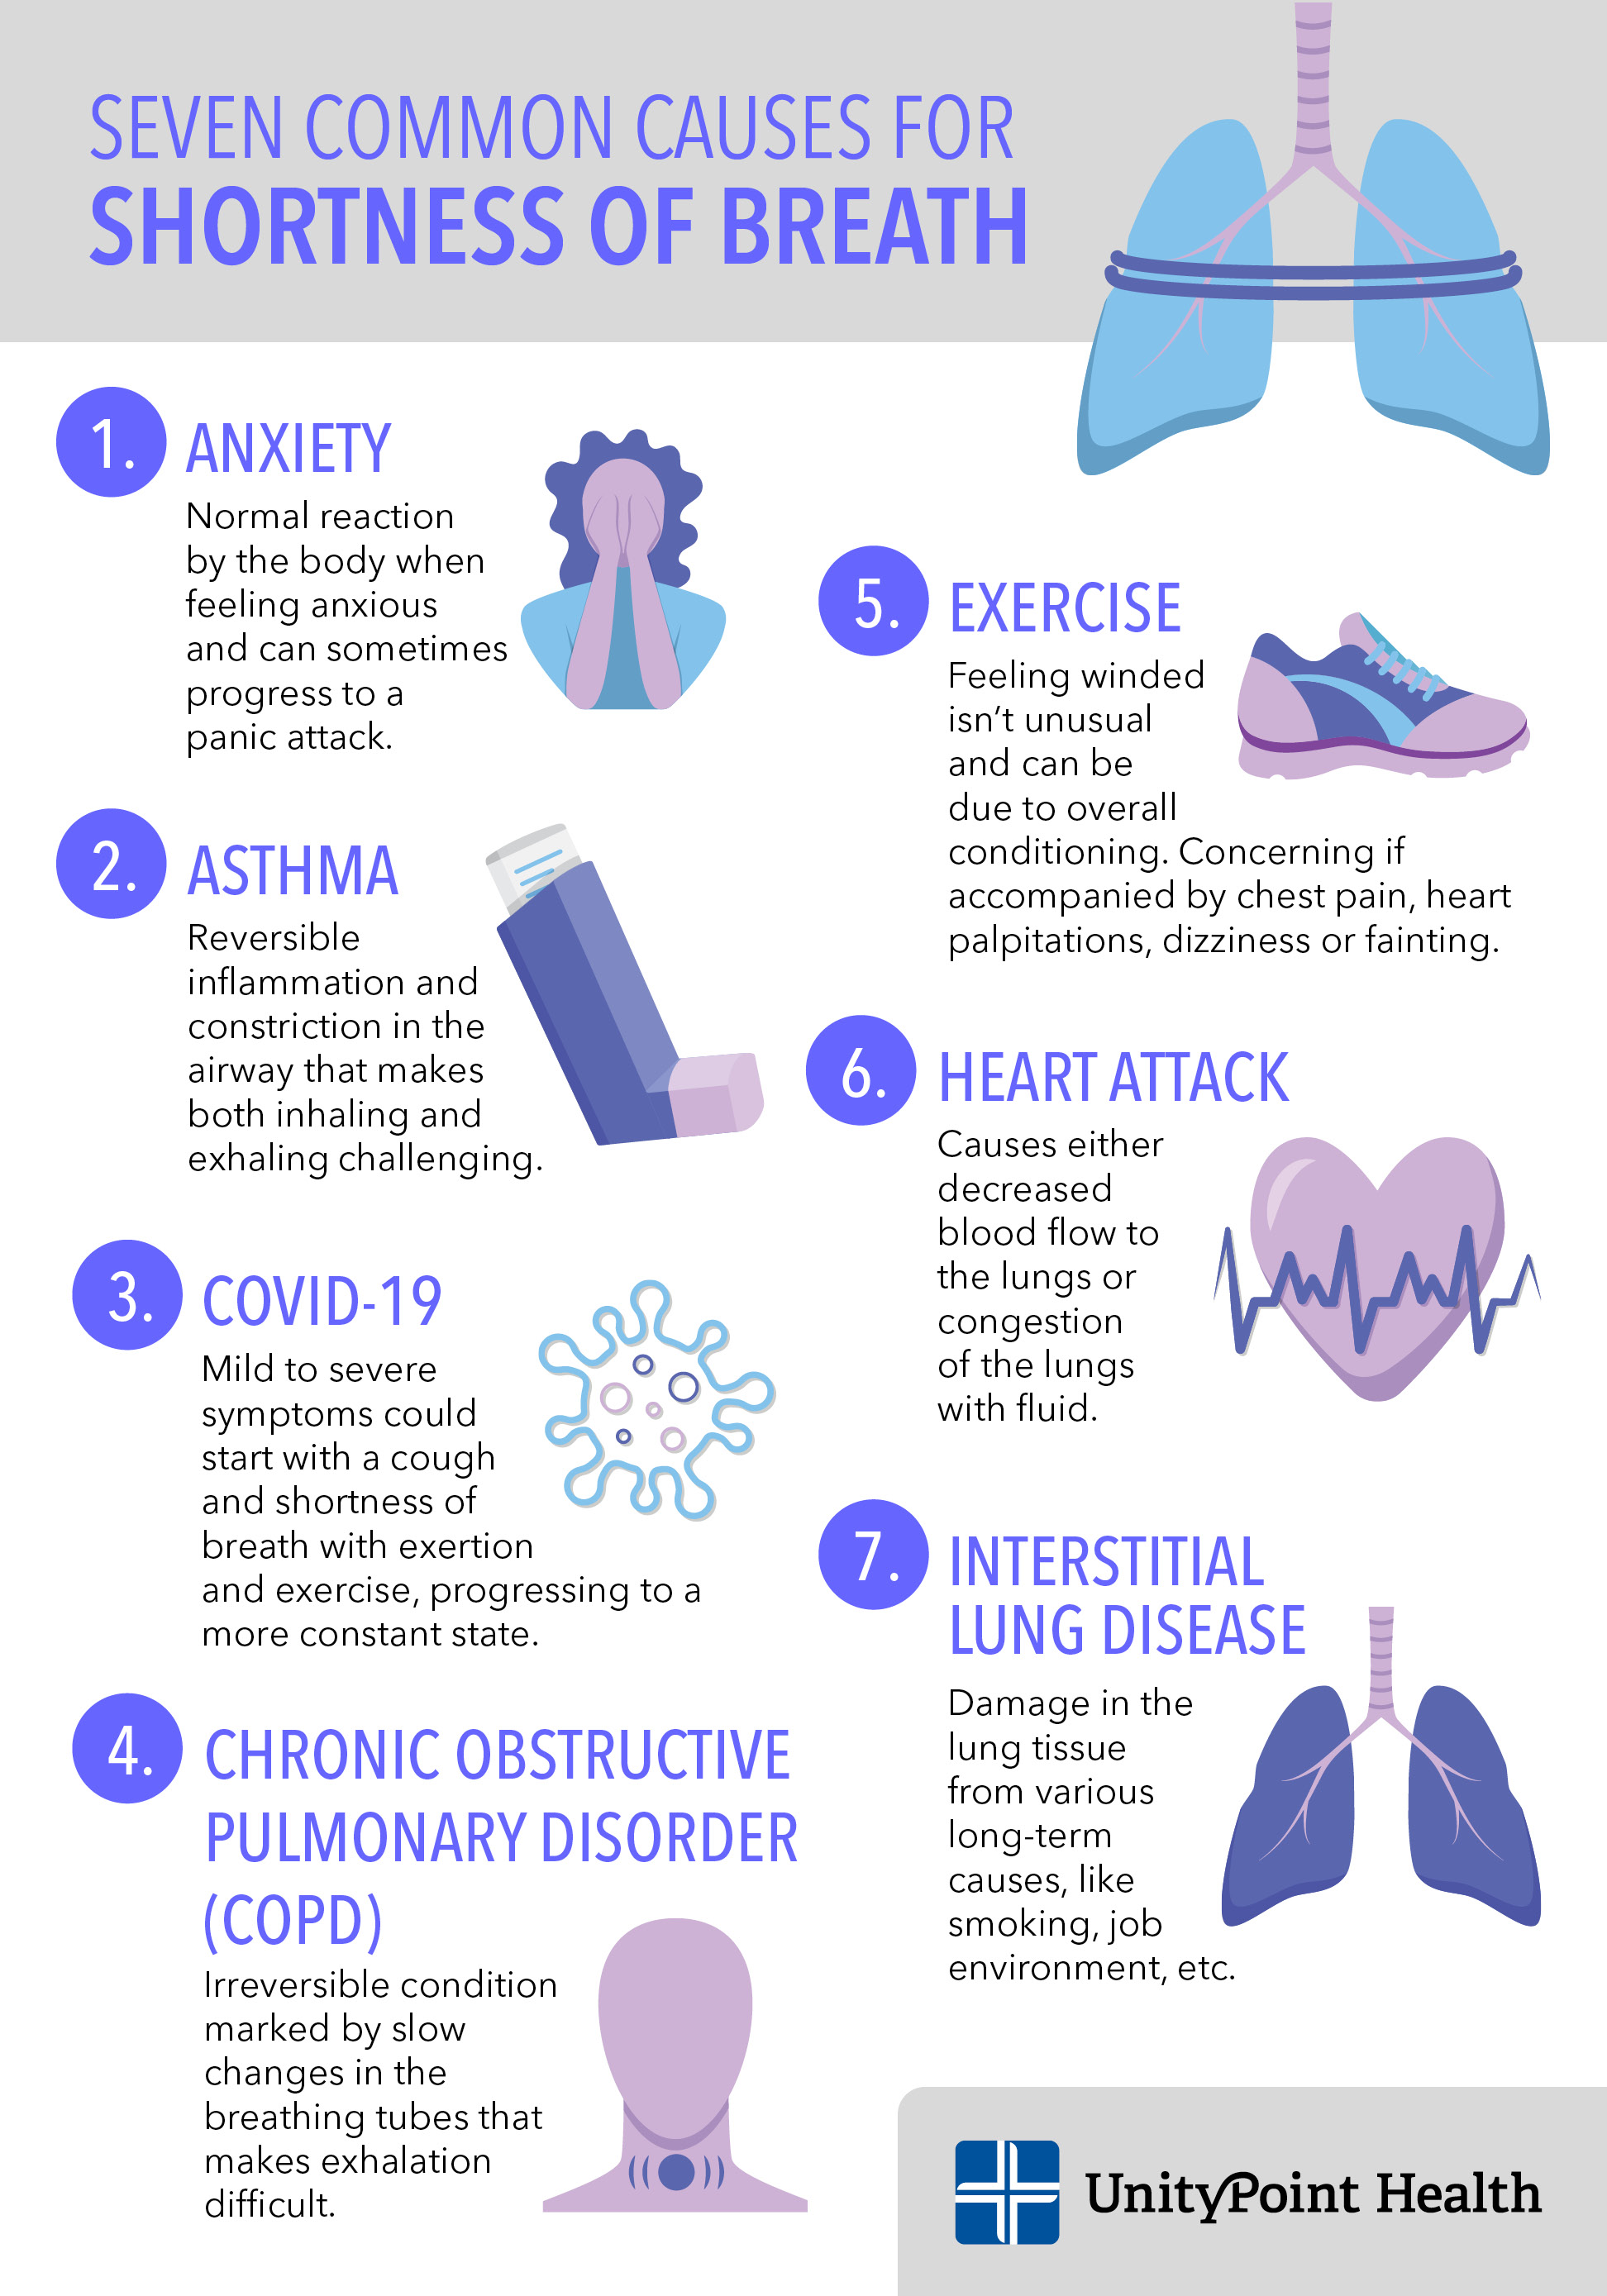 What causes short breath?